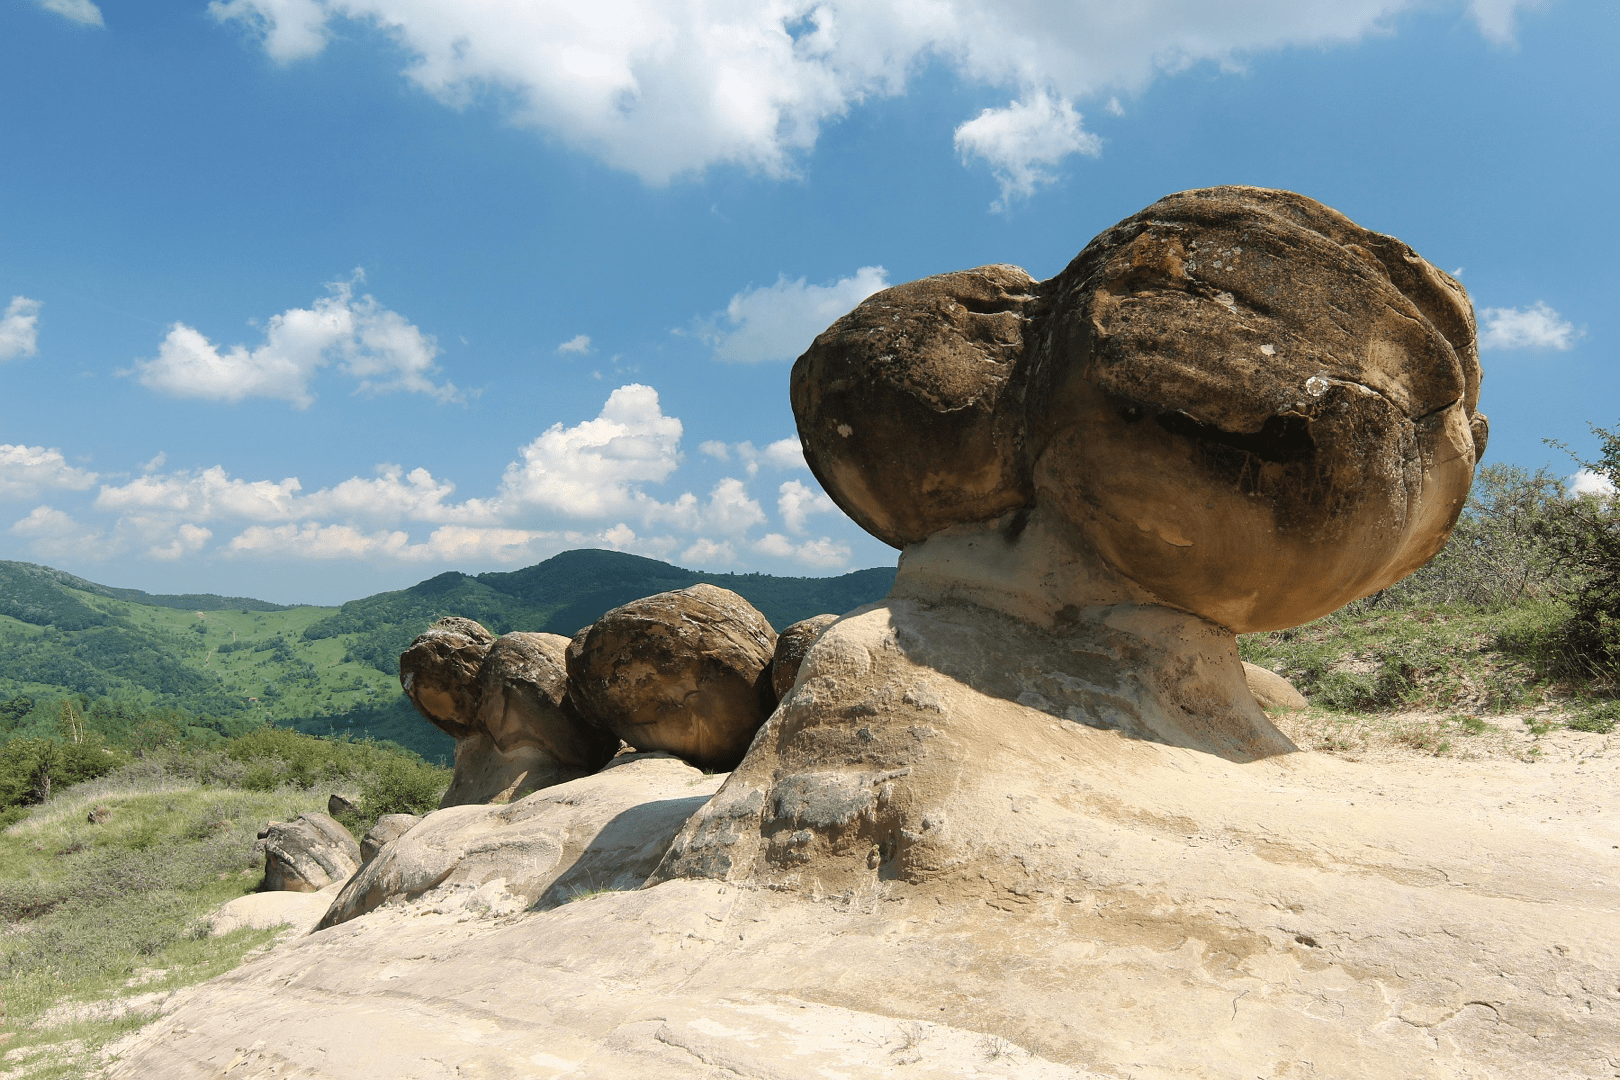 These trovants or living and moving geological formations are located near Ulmet in the Buzăului Mountains of Romania. Image credit: Wikimedia Commons (CC BY-SA 3.0)